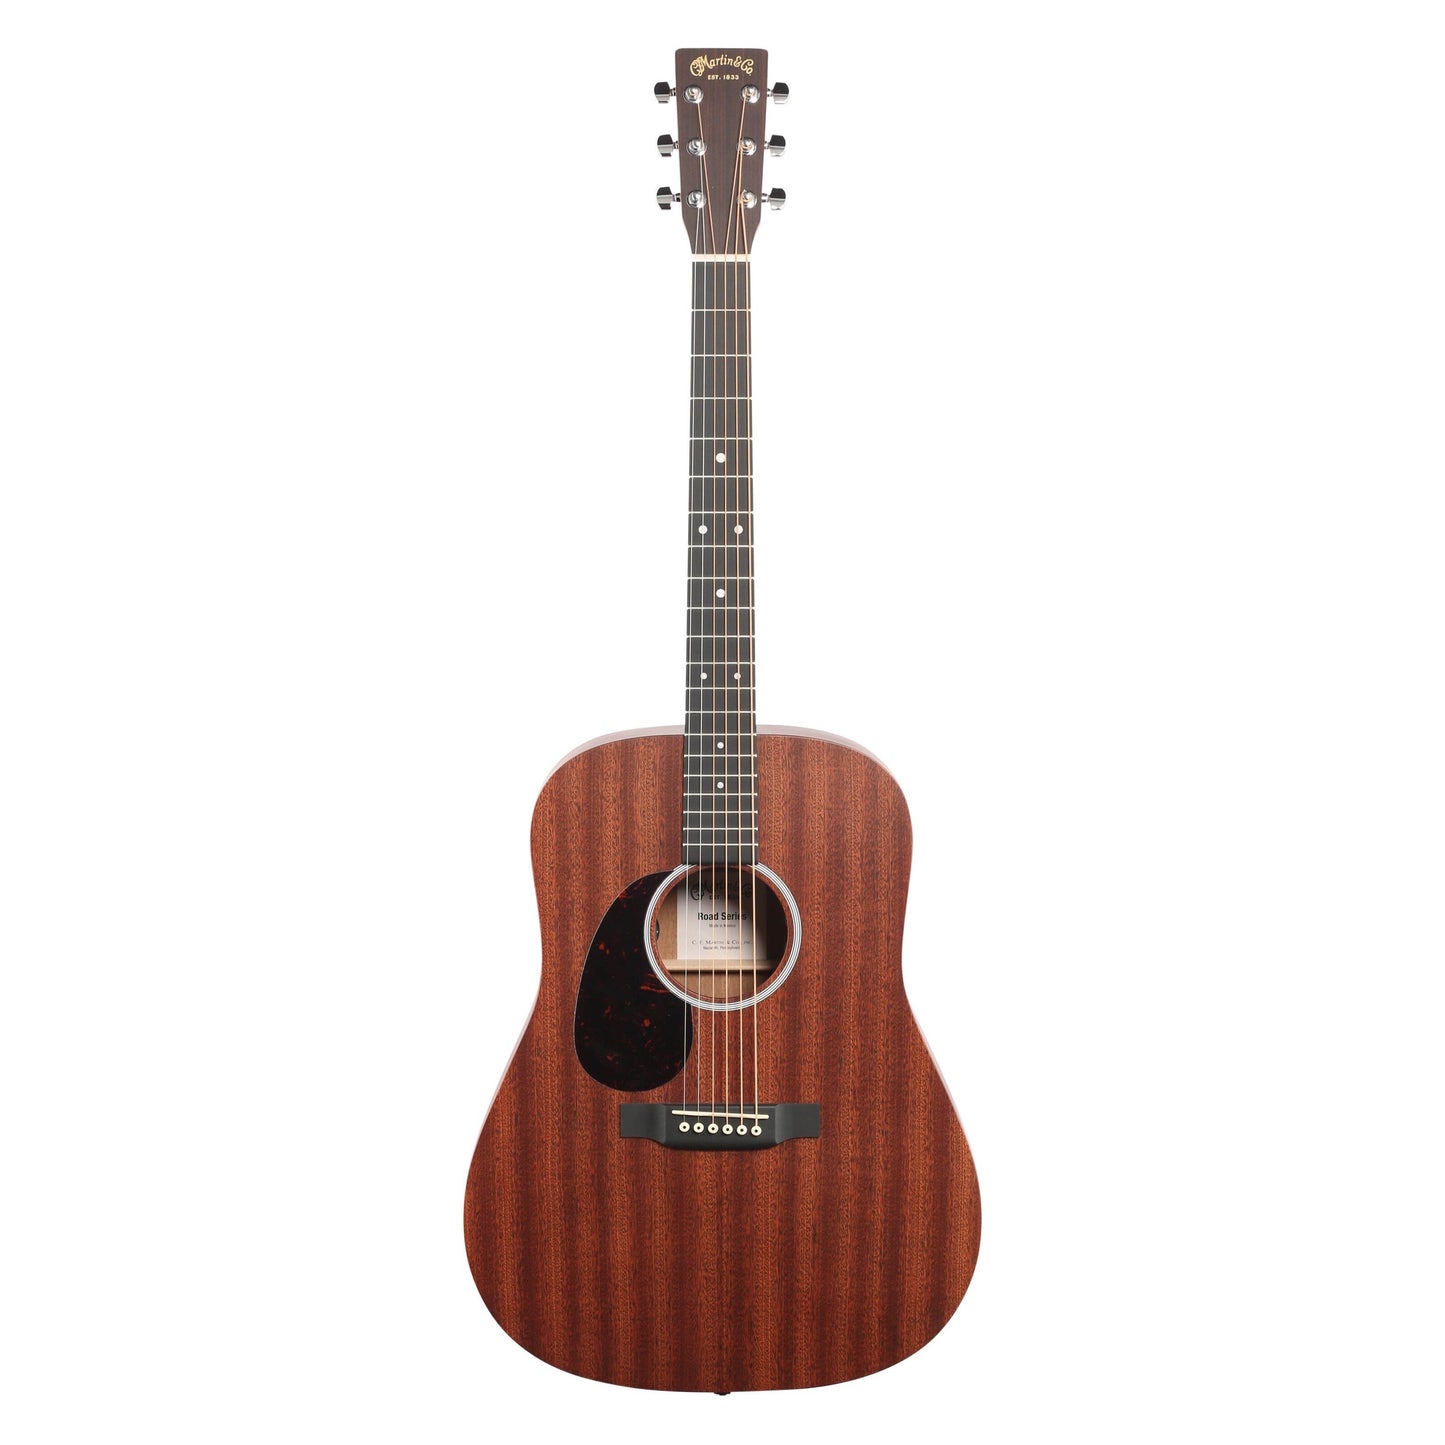 Martin D-10E Road Series Acoustic-Electric Guitar, Left-Handed (with Gig Bag), Natural - Sapele